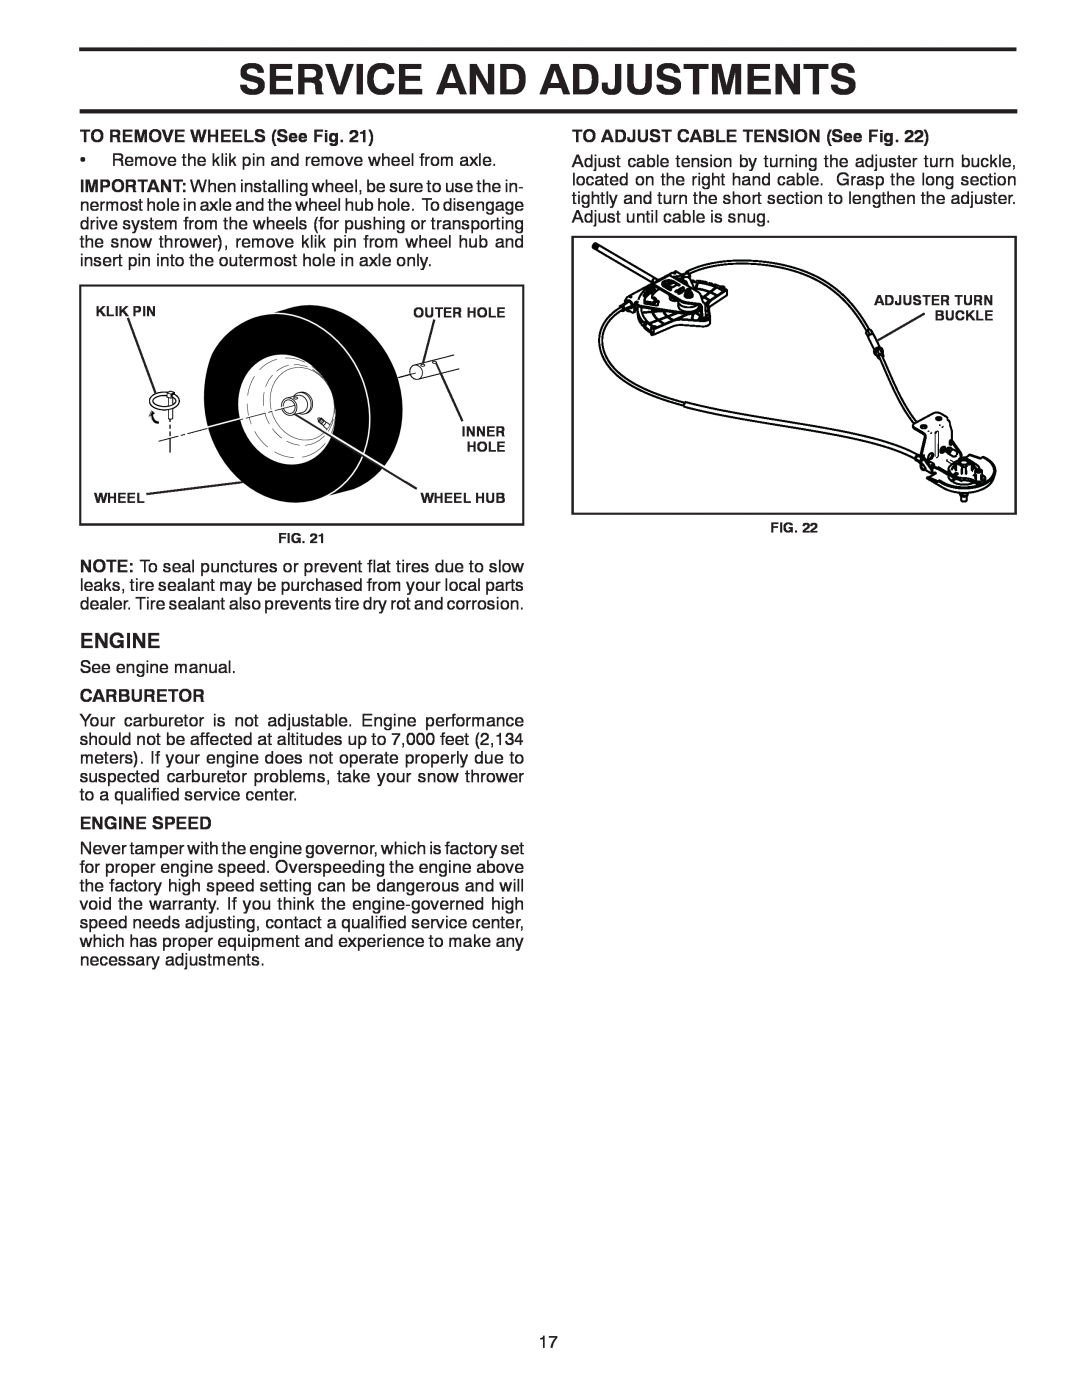 McCulloch 96192004001 owner manual Service And Adjustments, TO REMOVE WHEELS See Fig, Carburetor, Engine Speed 